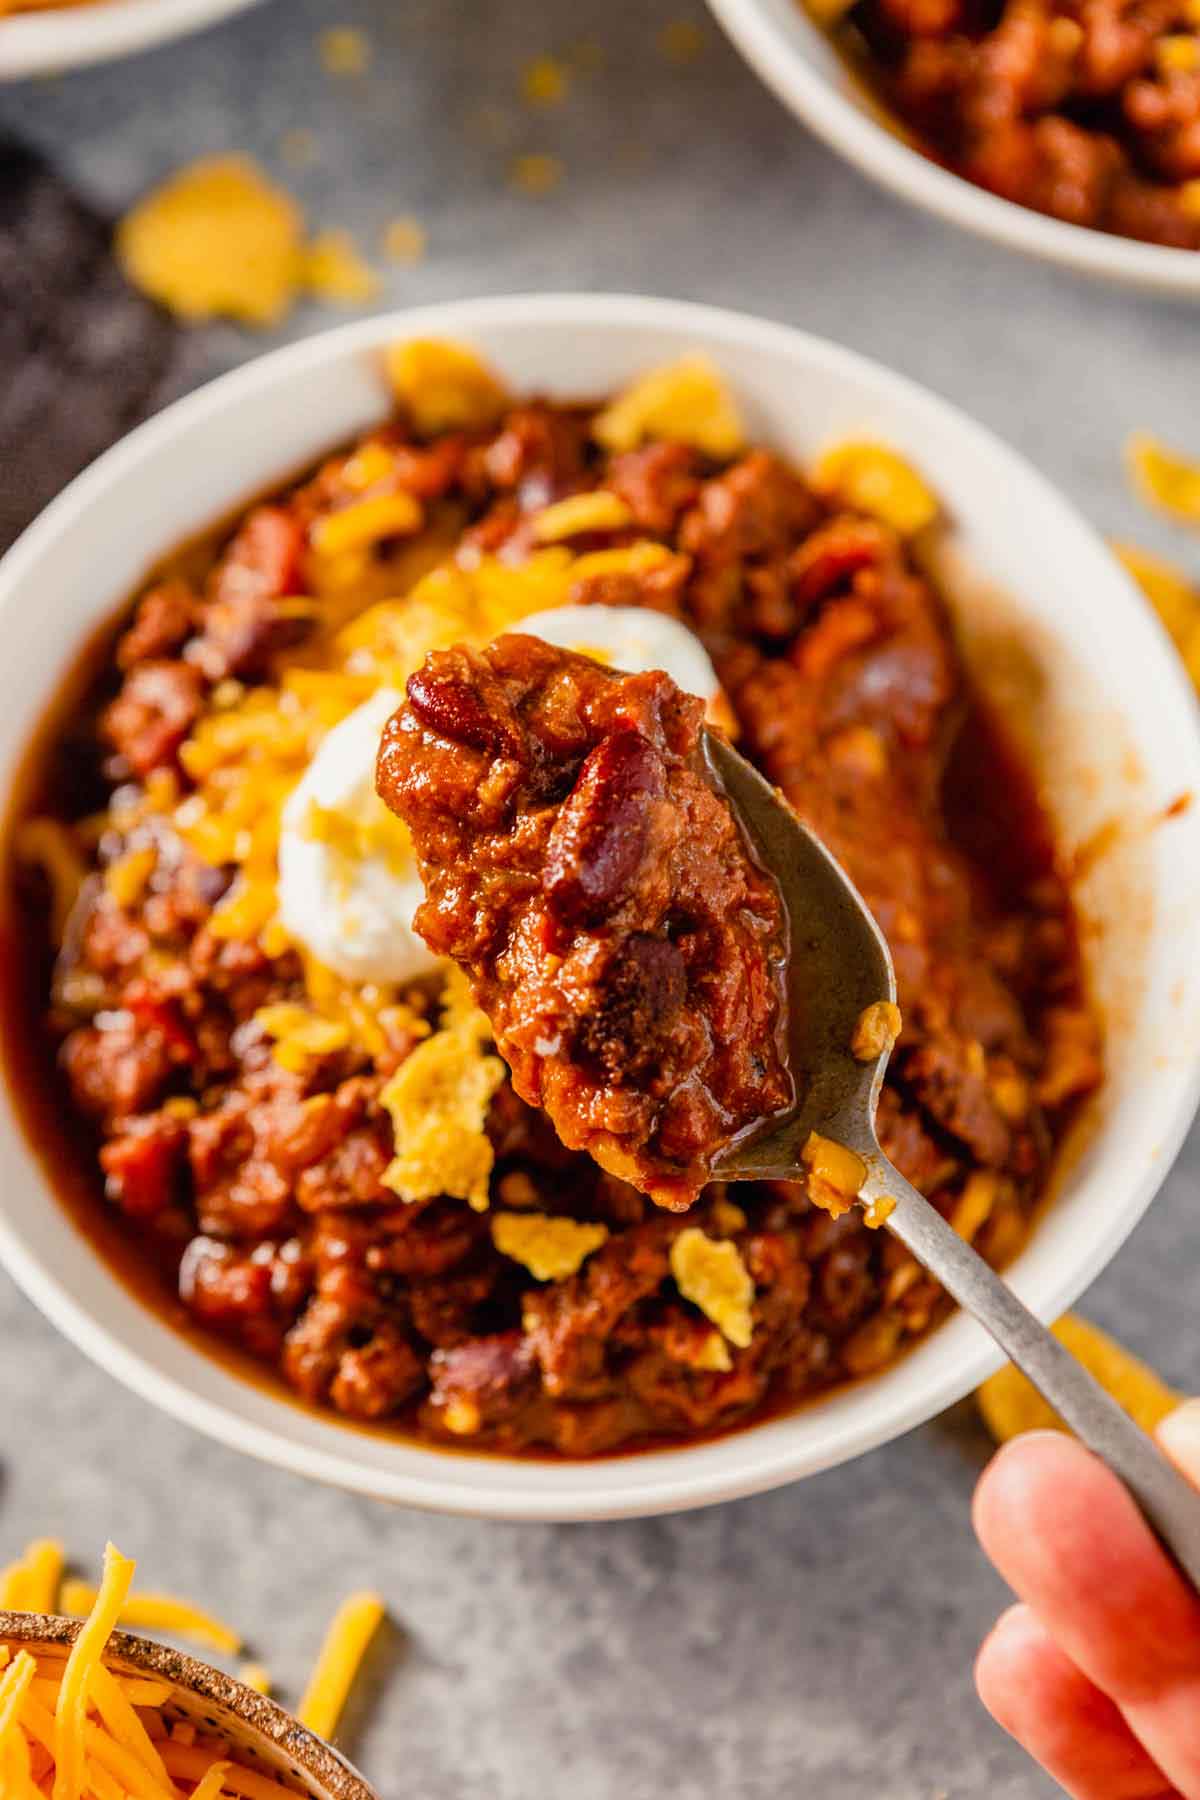 Close up photo of spoonful of chili held over a whole bowl of chili with sour cream and corn chips visible.